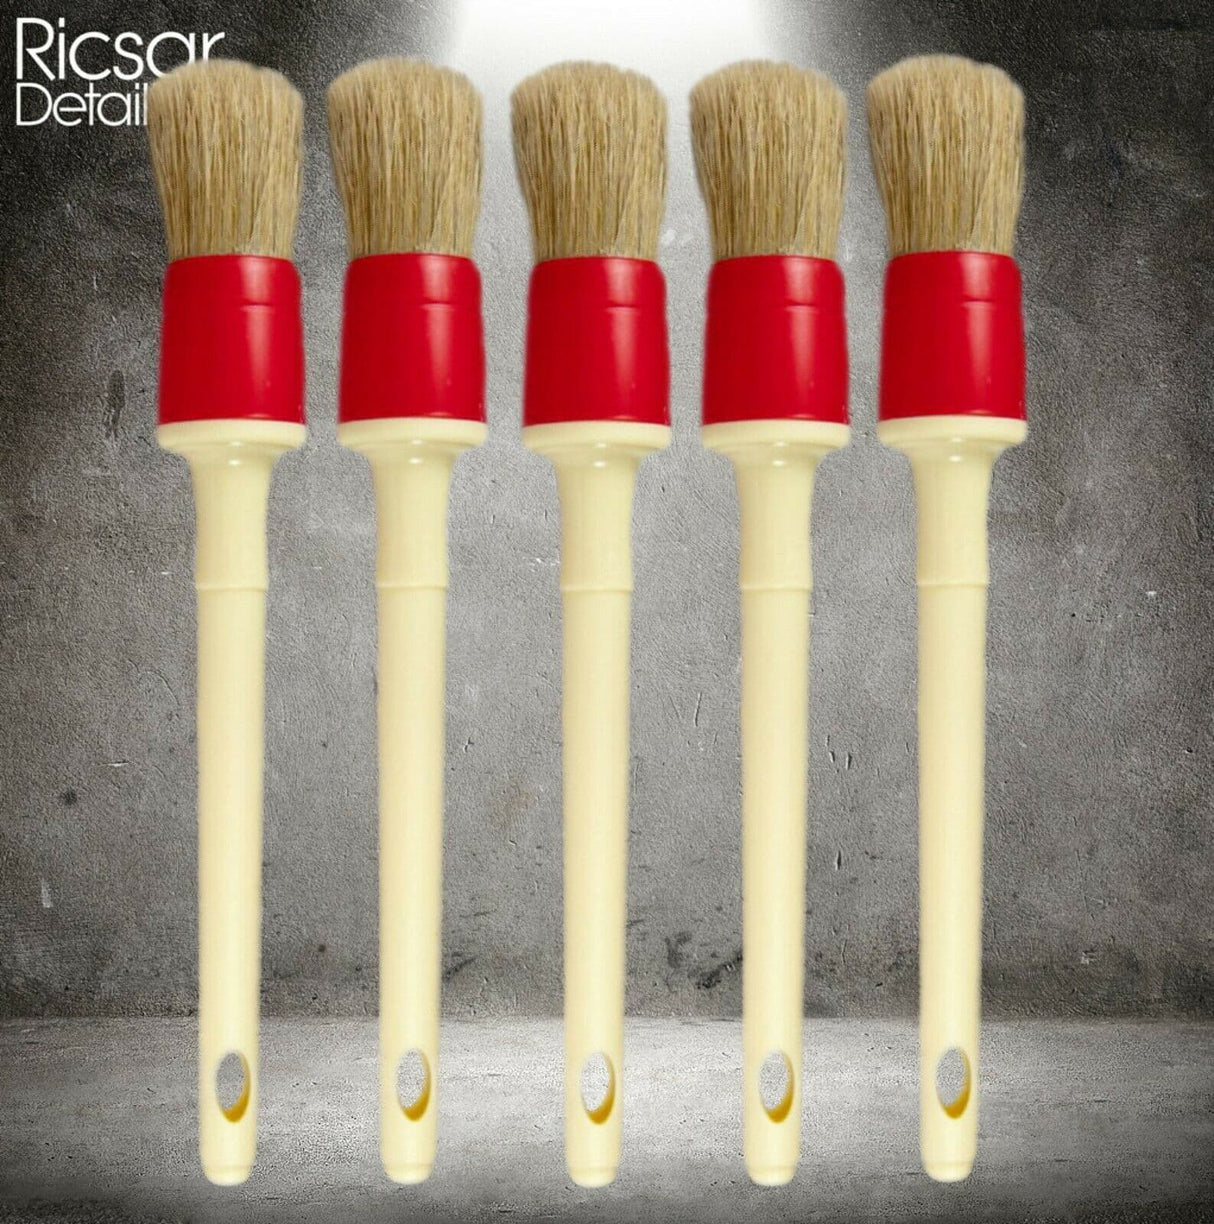 5 x Large Soft Car Detailing / Wheel Cleaning Brushes - Vents/Dash/Engine/Wheels